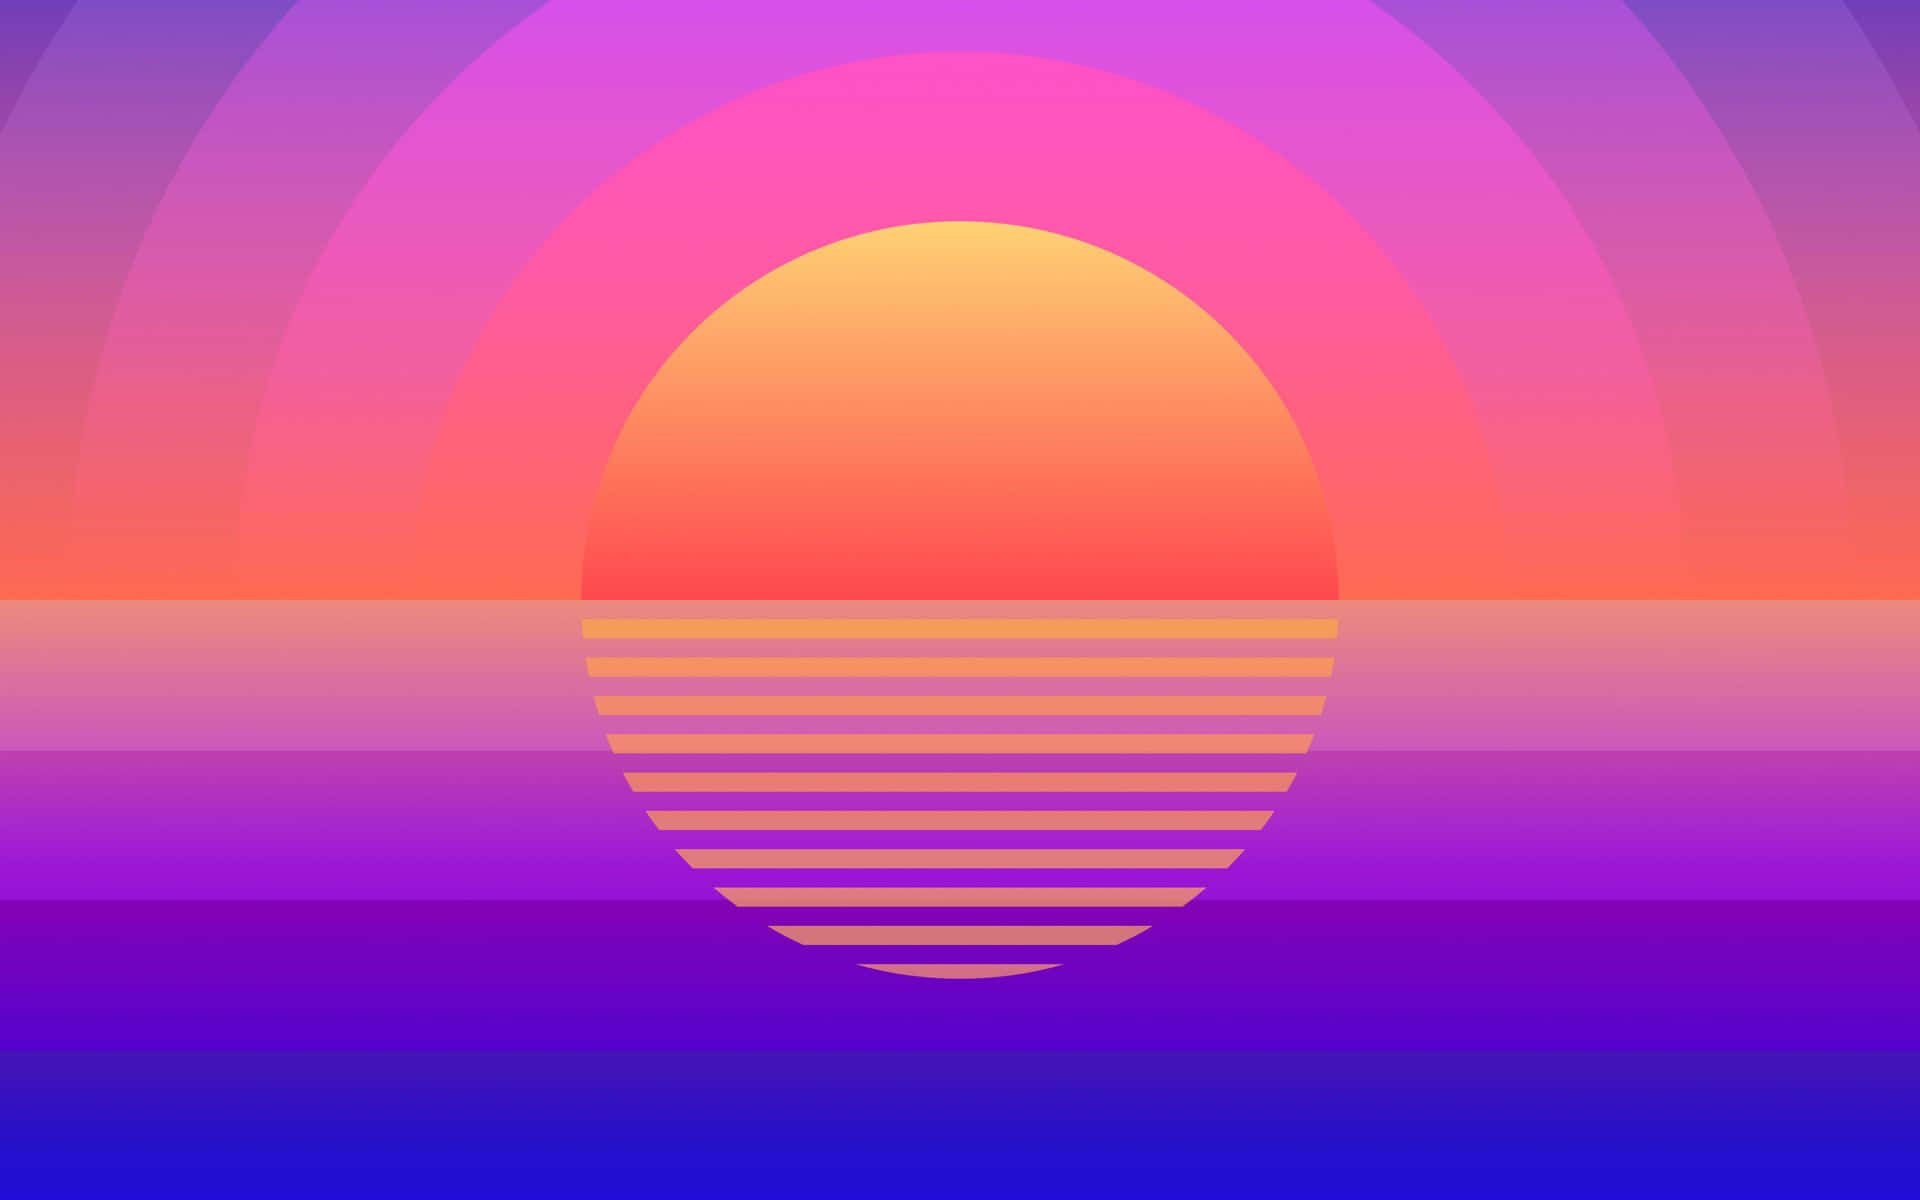 Reflection of a retro sunset. Wallpaper